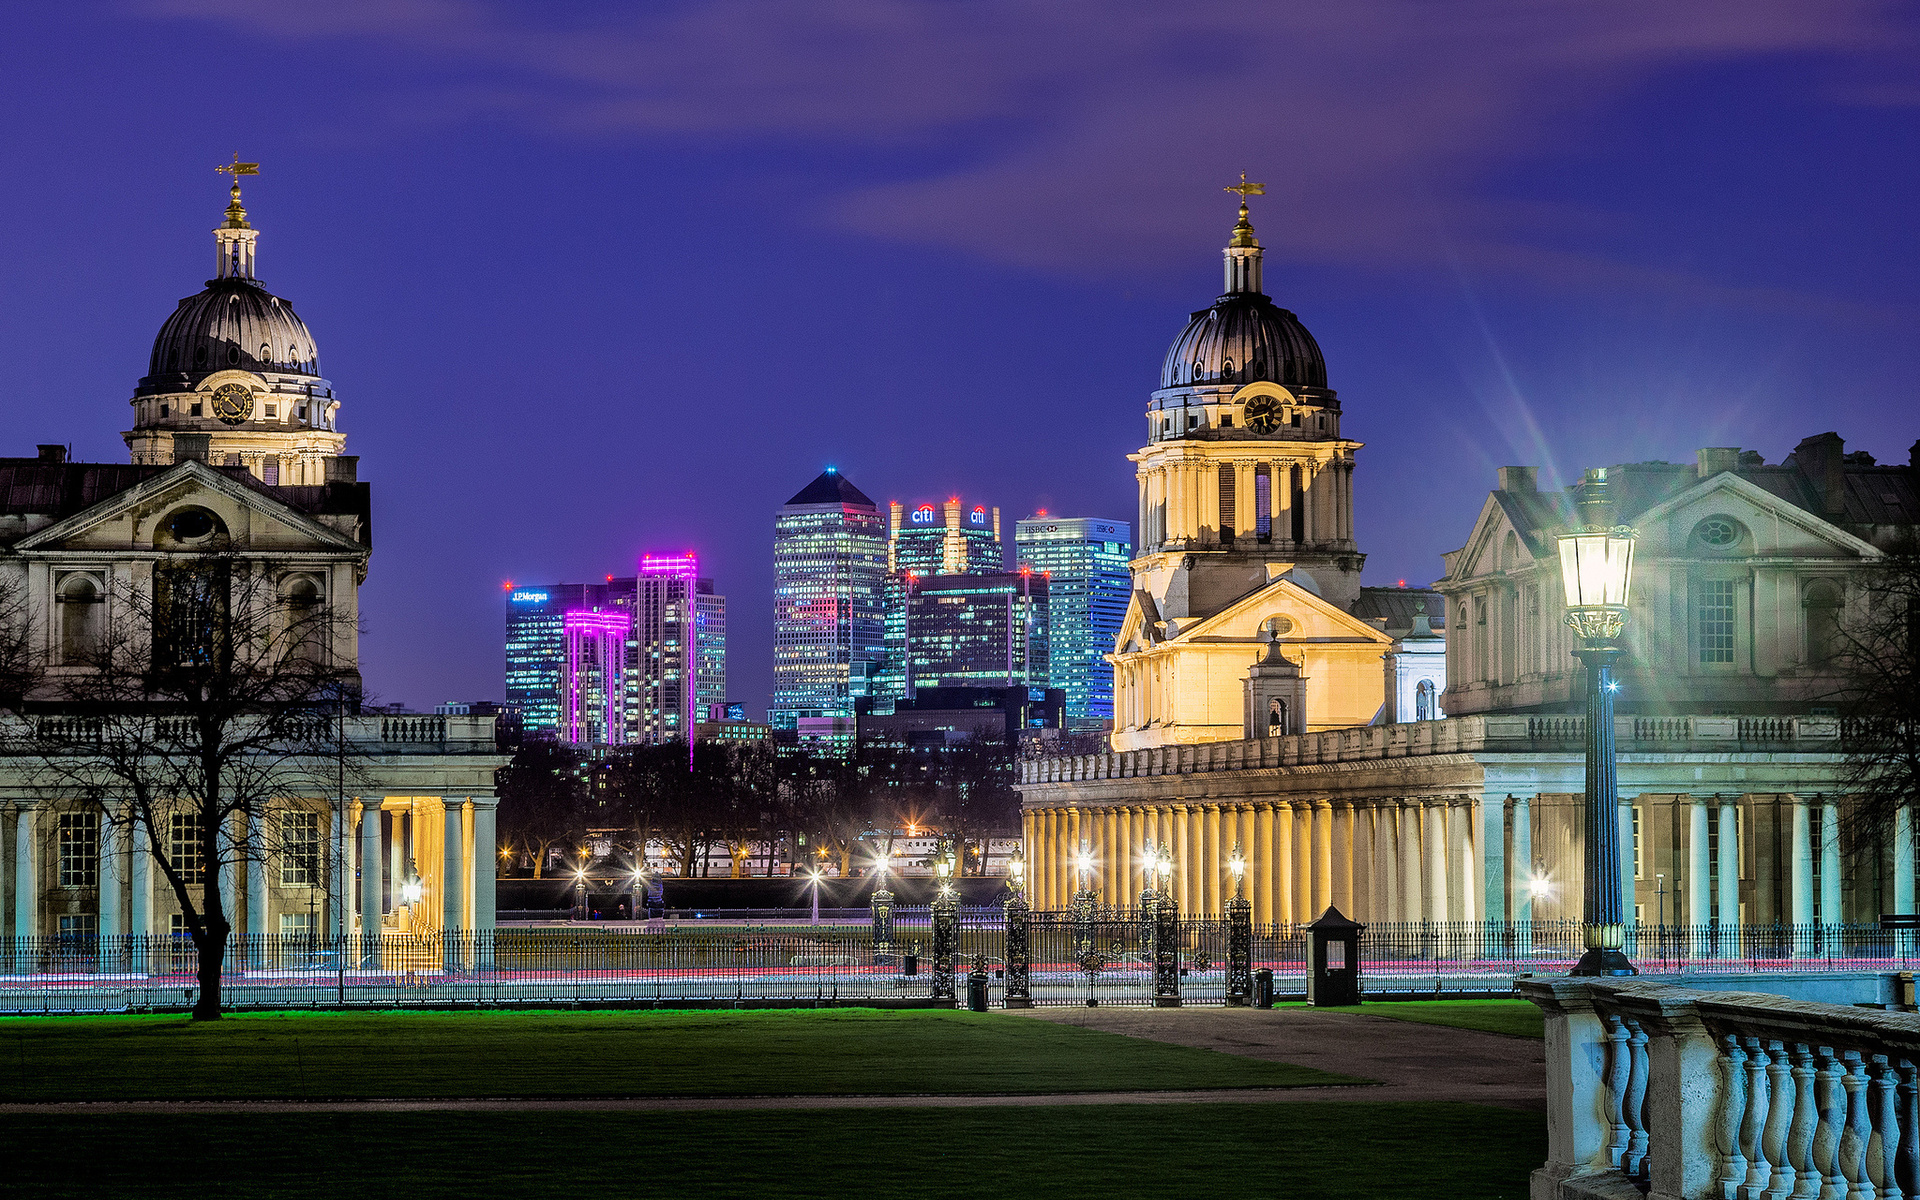 royal, Greenwich, Observatory, London, England, Architecture, Buildings, Night, Lights, Lamp, Park, World, Places, Cities, Skyscraper, Skyline, Cityscape Wallpaper